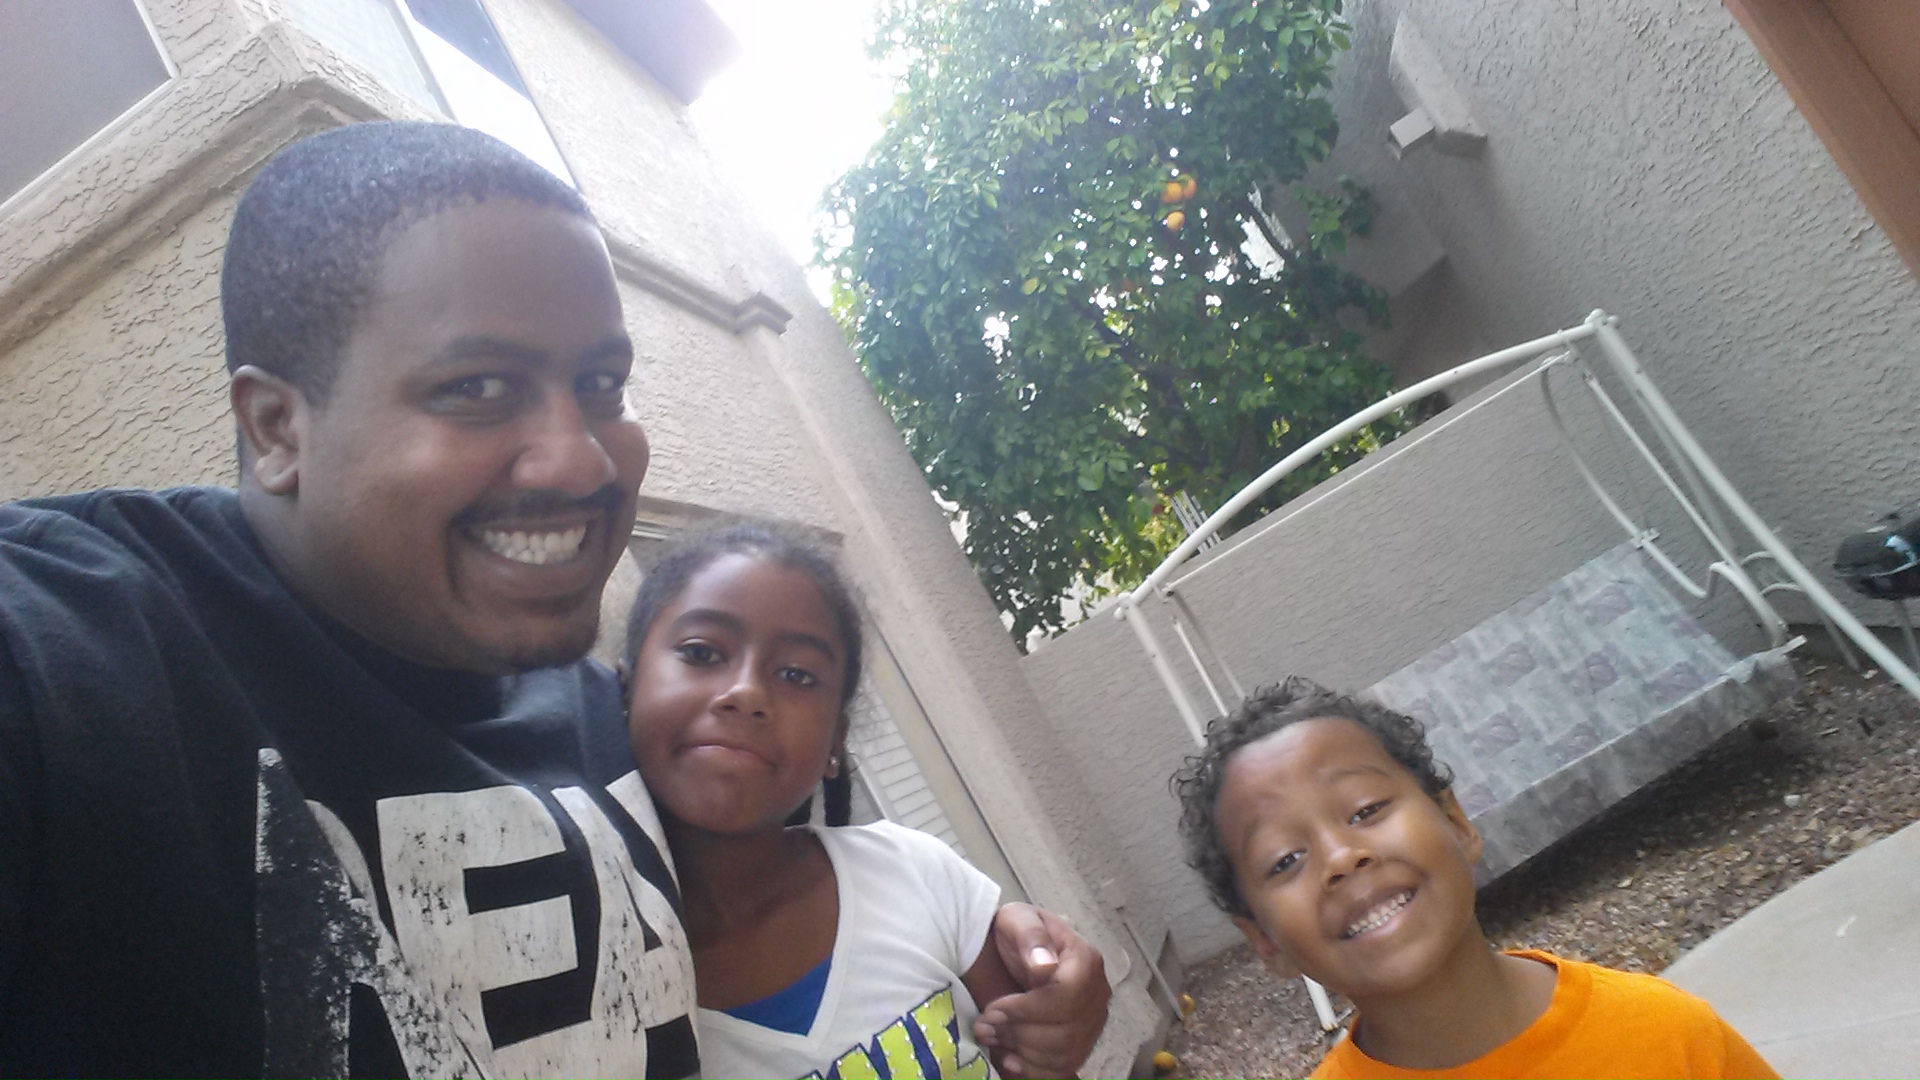 Me and the kids about ready to head out for the day!!!